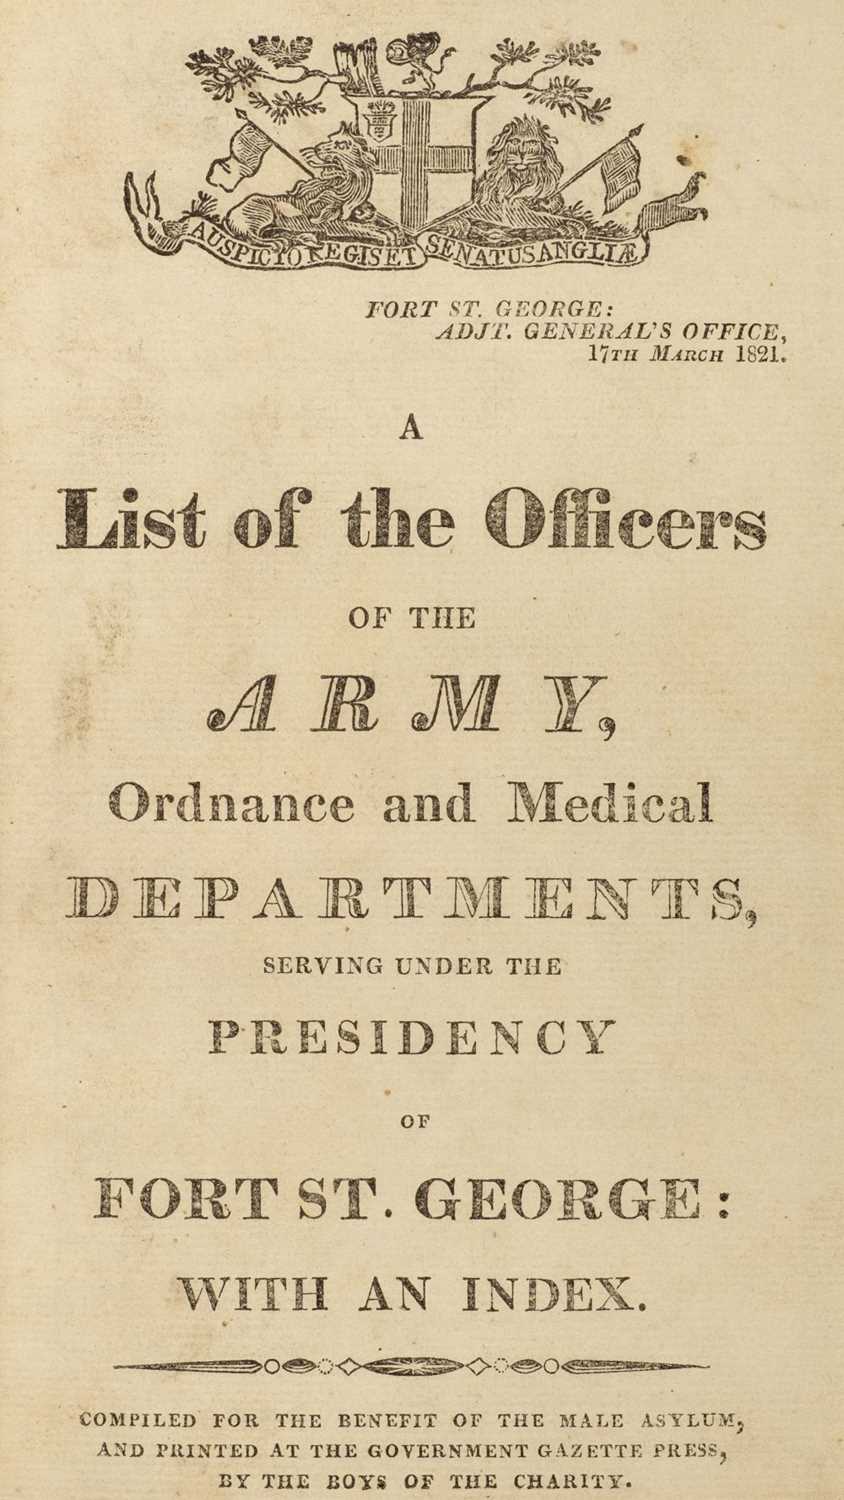 Lot 5 - Army Lists. A List of the Officers of the Army serving under the Presidency of Fort St George, 1821